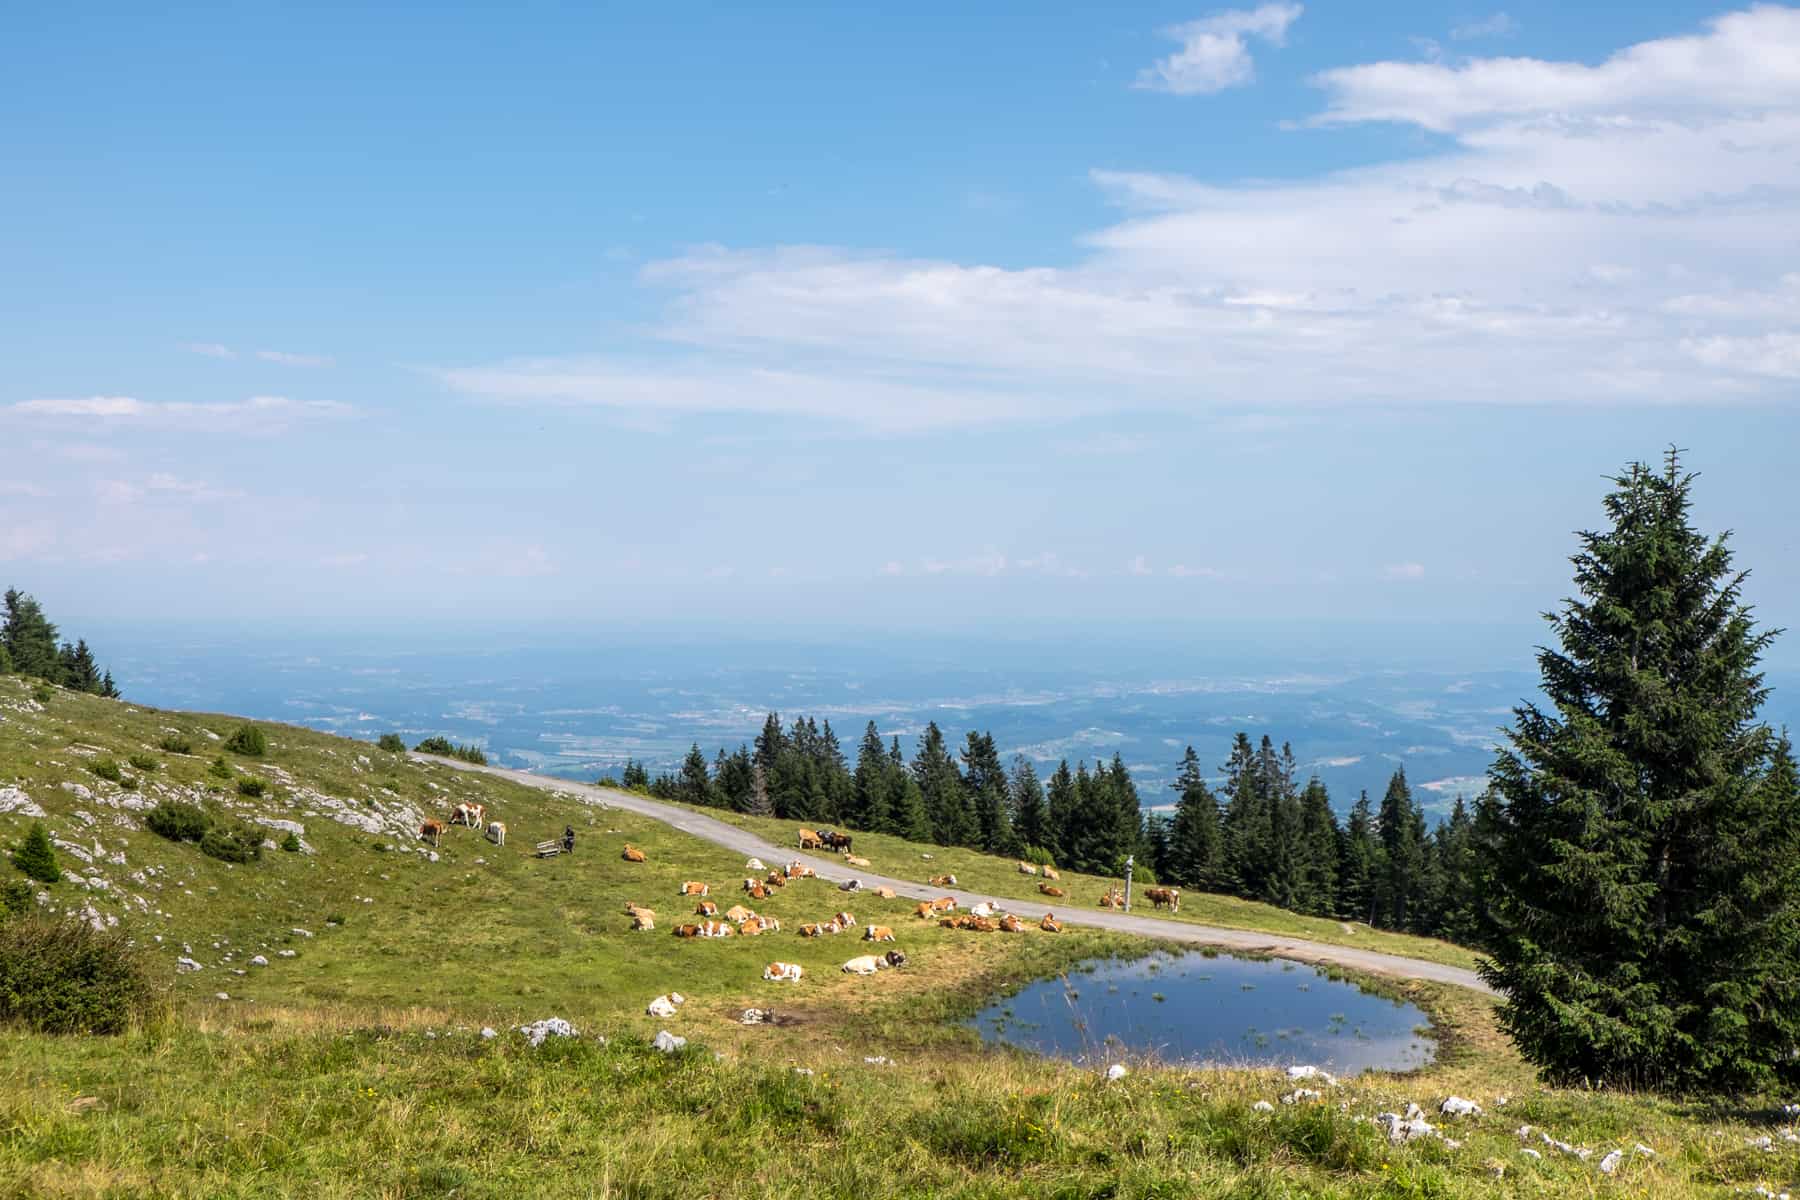 A herd of cows next to a pool of water, surrounded by trees on top of the green woodland of Schöckl Mountain, Graz, Austria